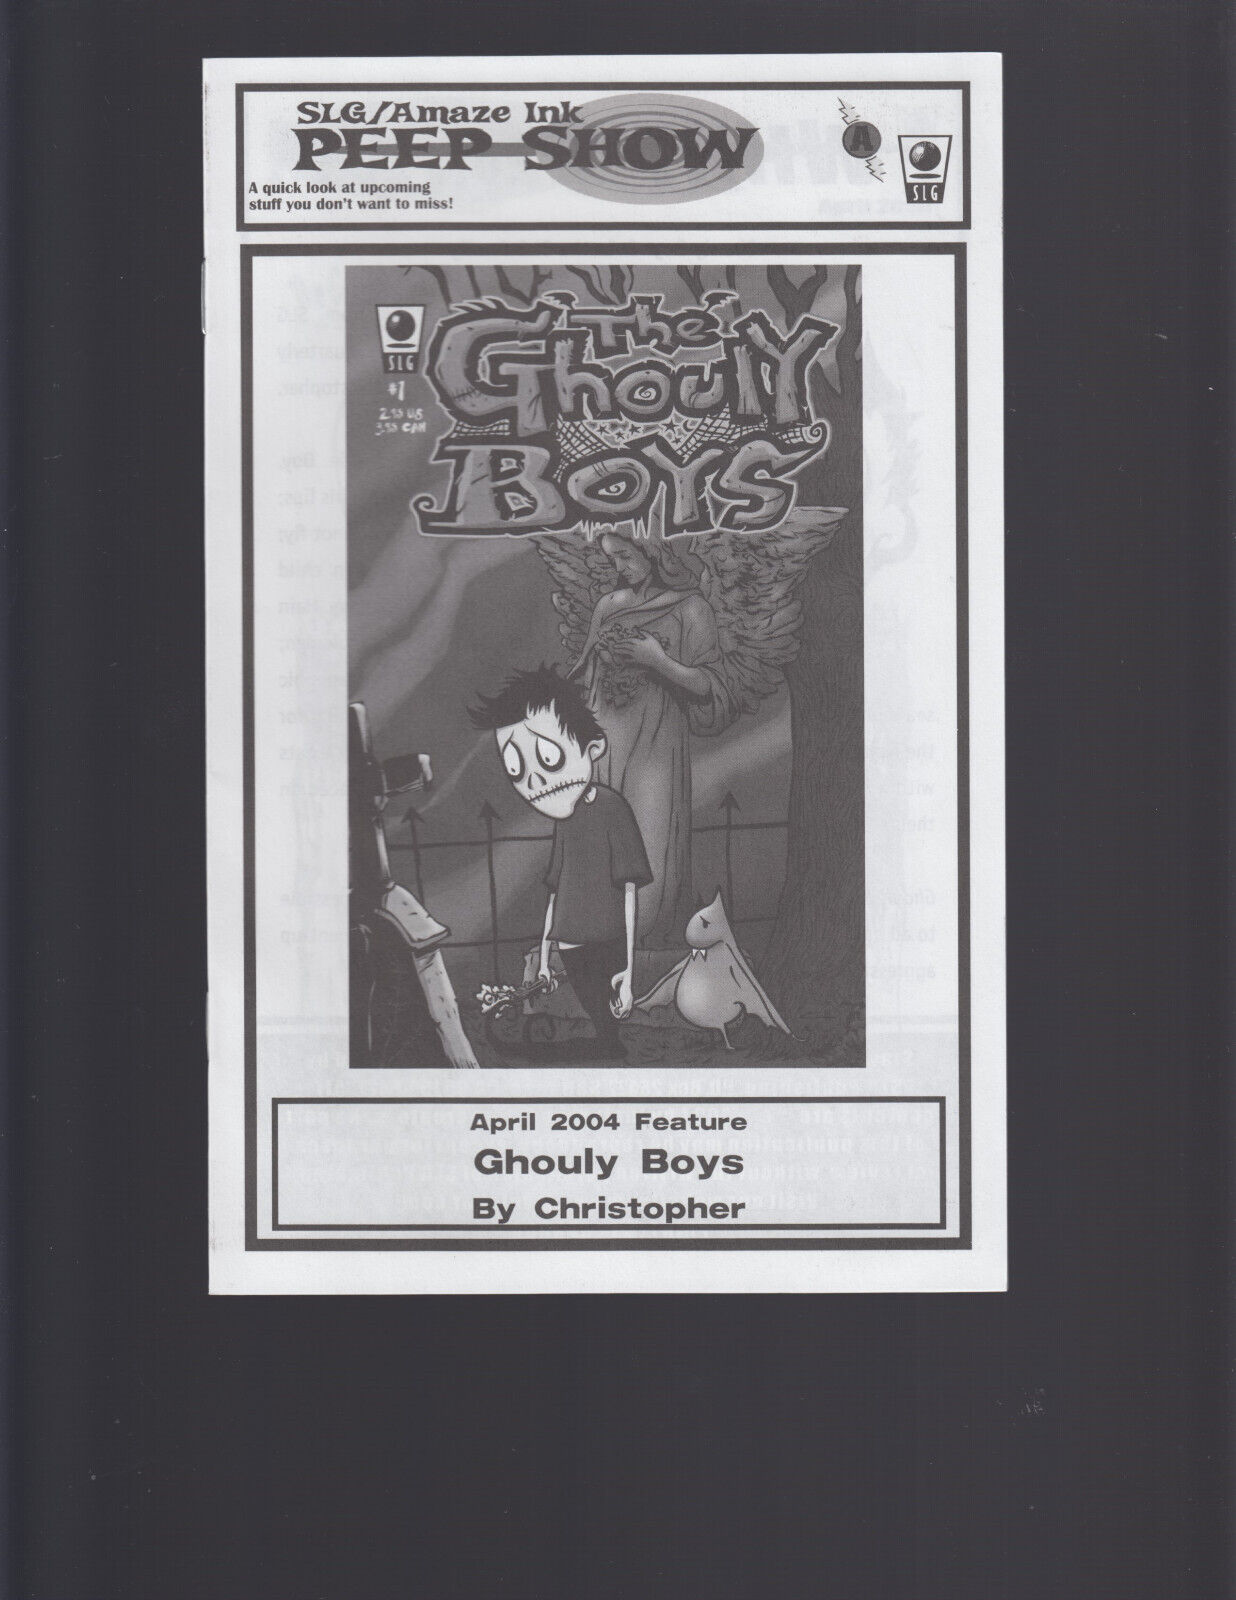 SLG / AMAZE INK PEEPSHOW v3 #2 (Ghouly Boys Ashcan Preview, Newsletter) NM 2004